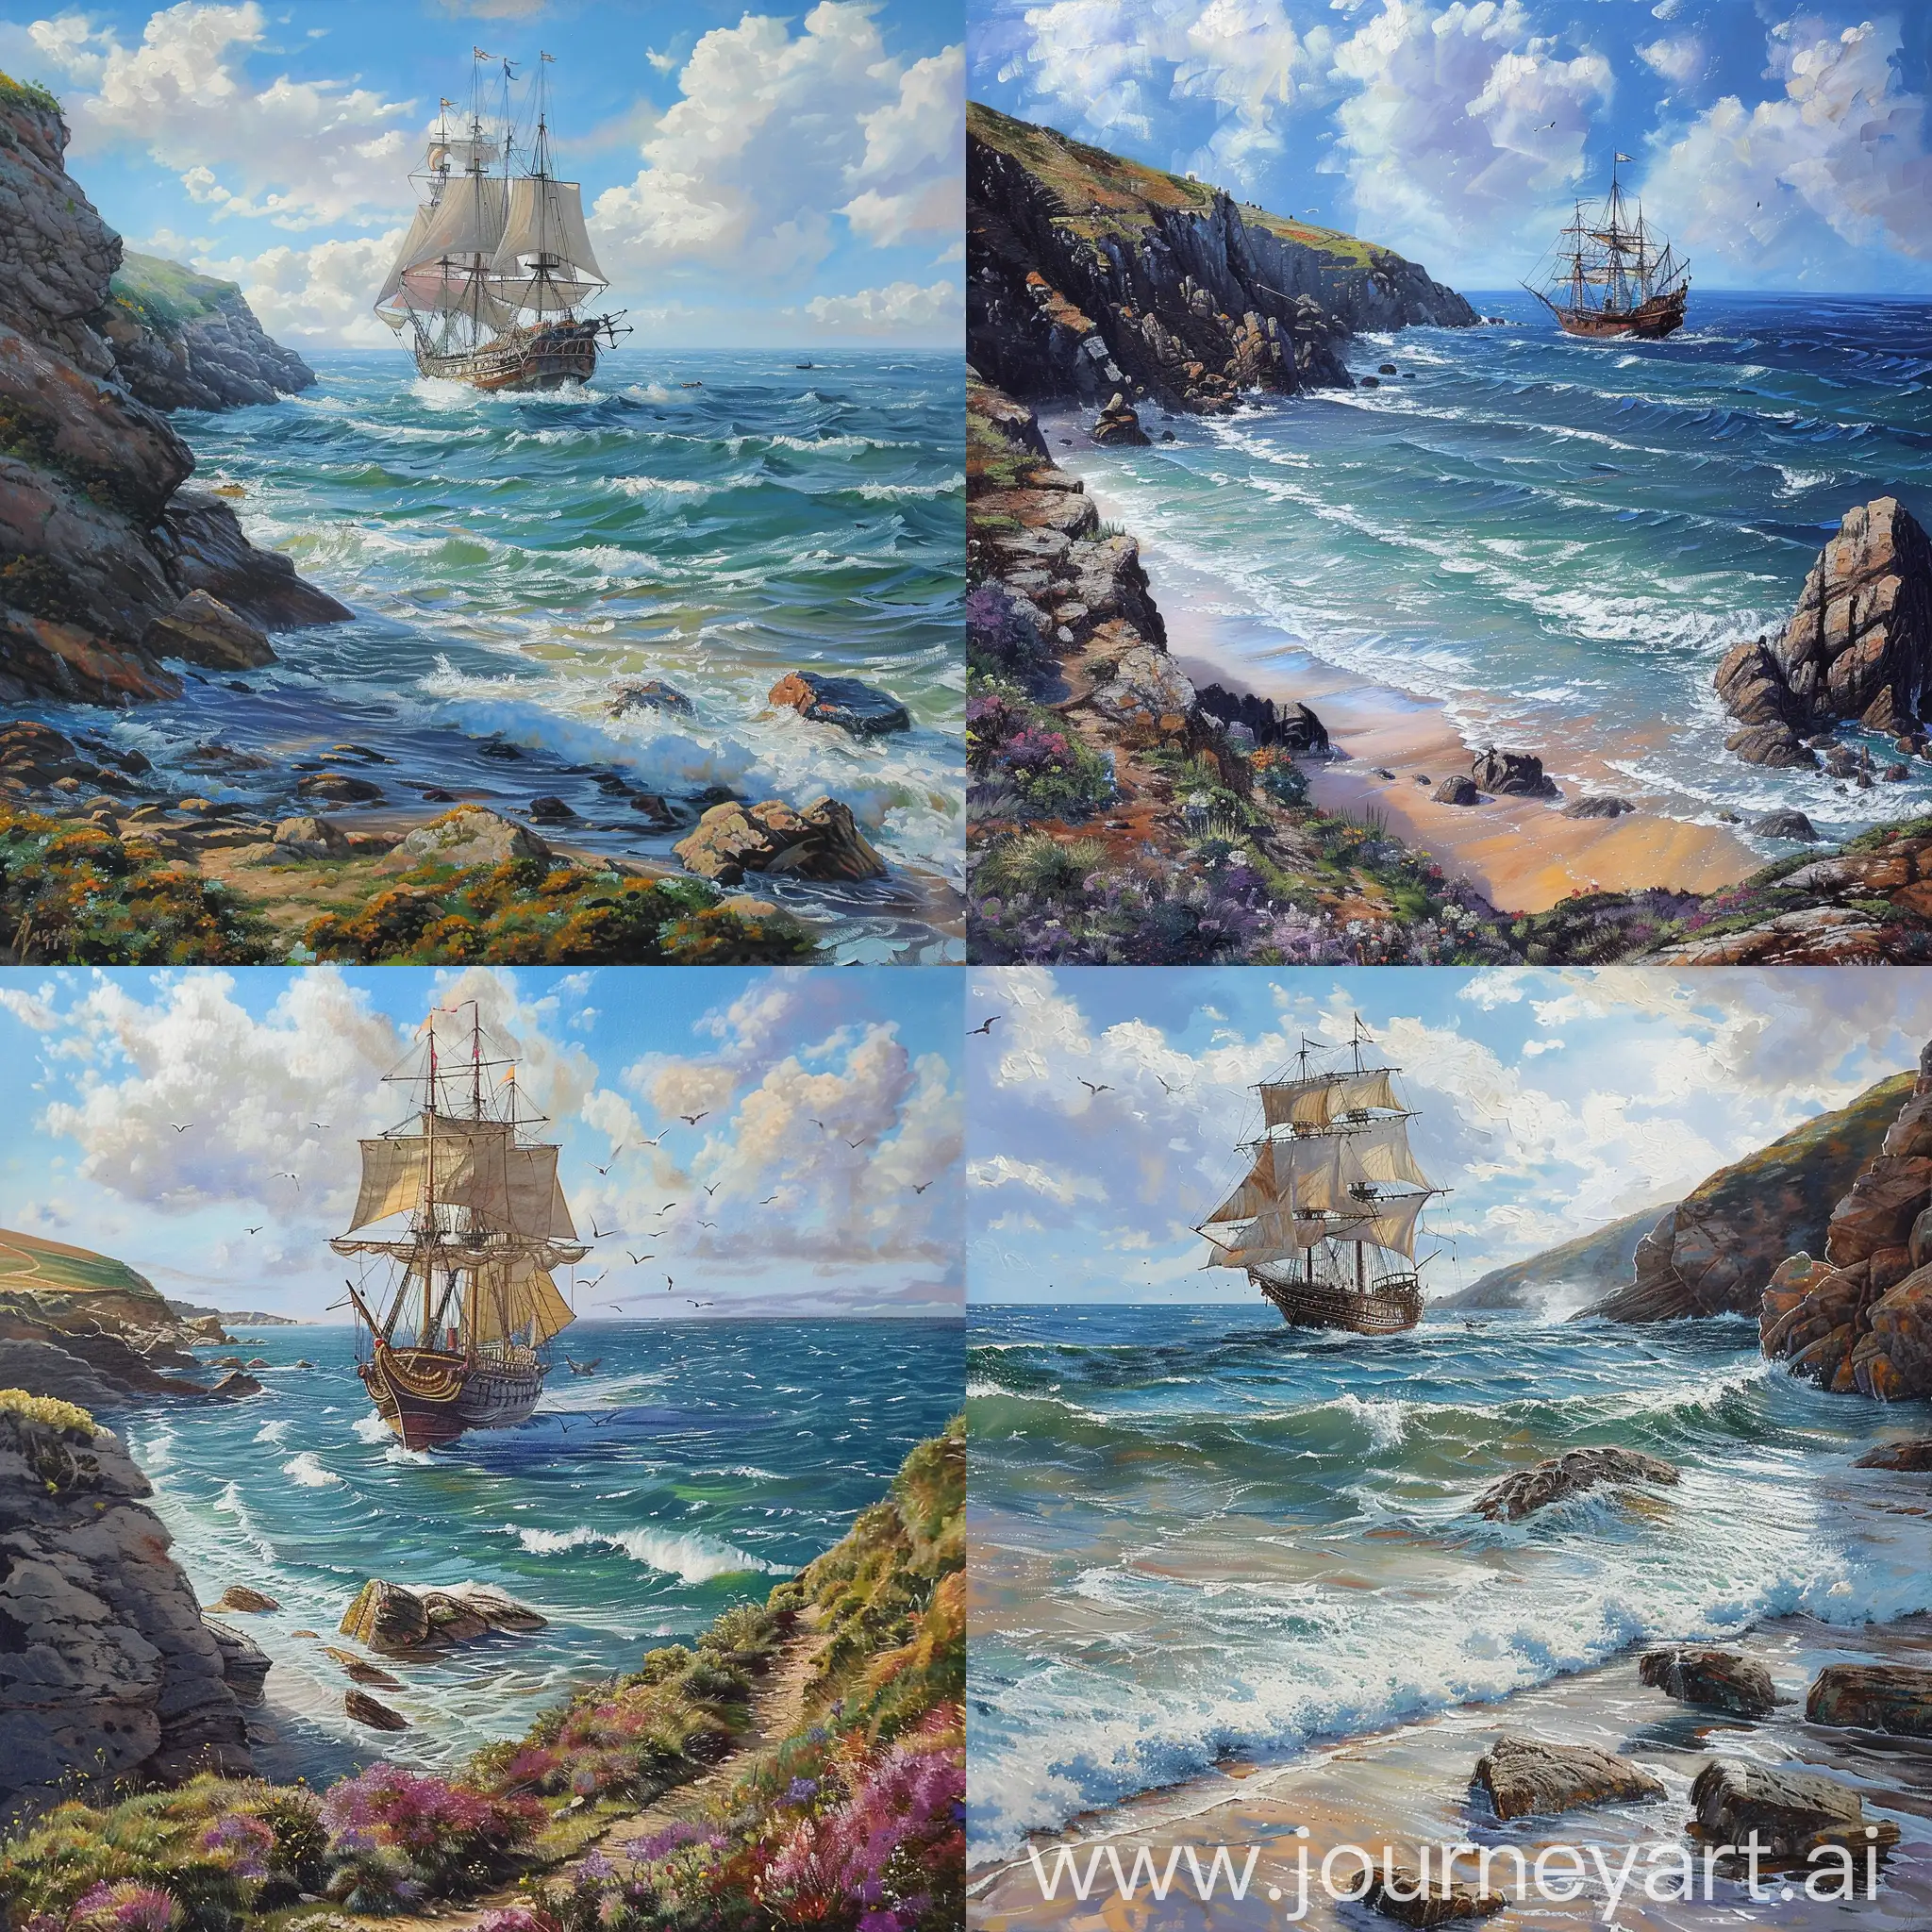 Sunny-Day-Galleon-Seascape-Painting-off-Cornwall-Coast